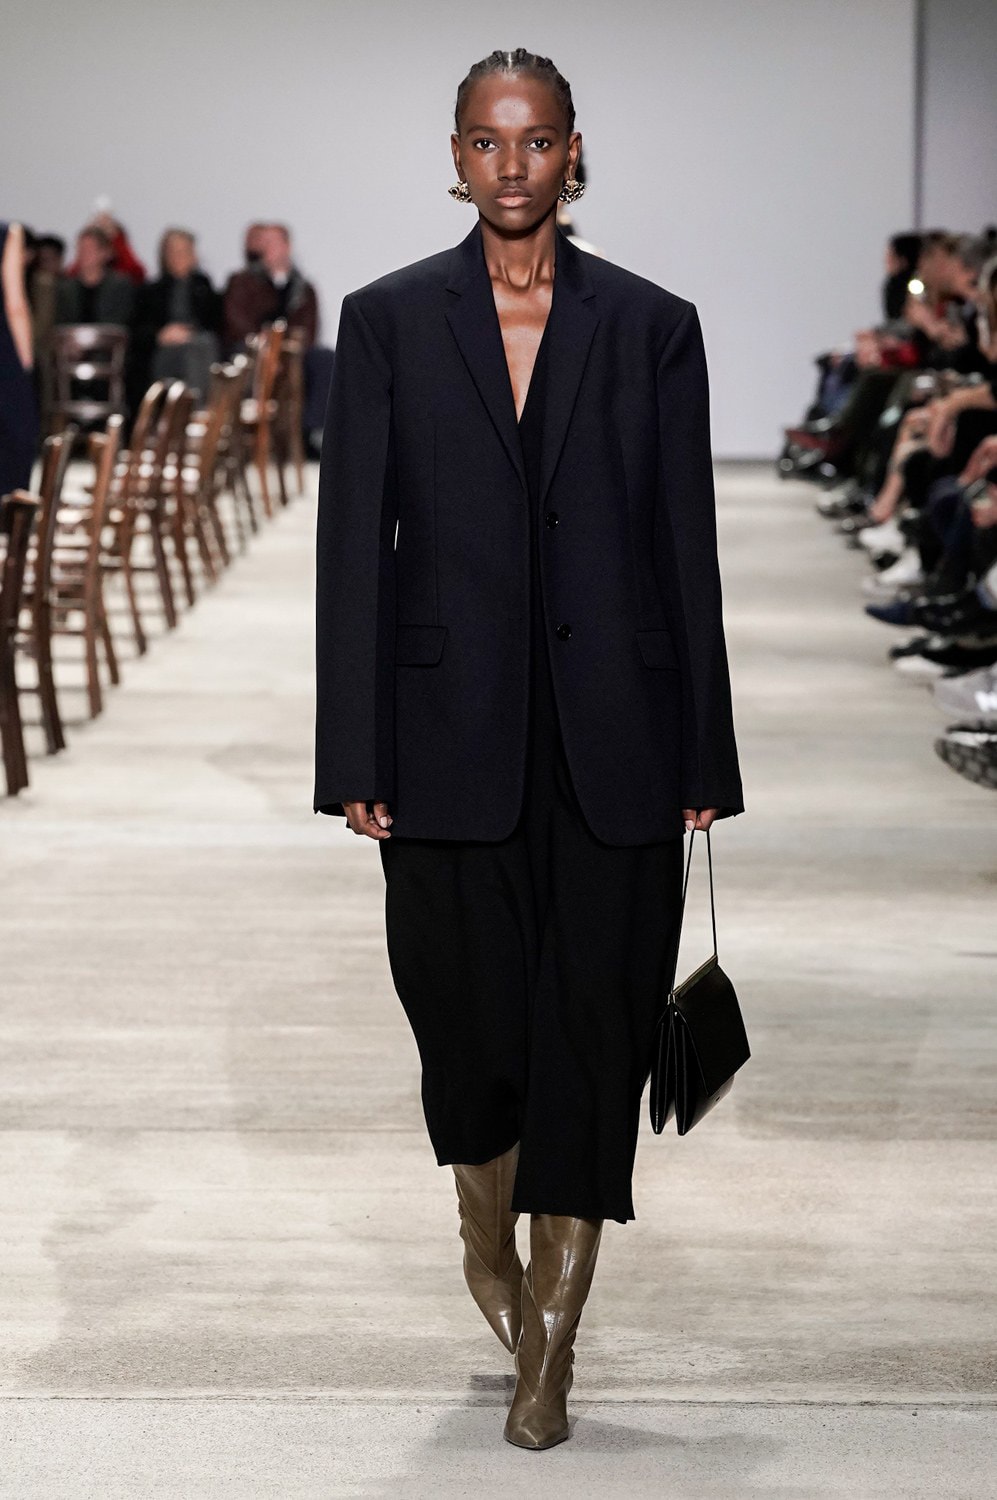 Jil Sander Fall/Winter 2020 Collection Runway Show Suit Black